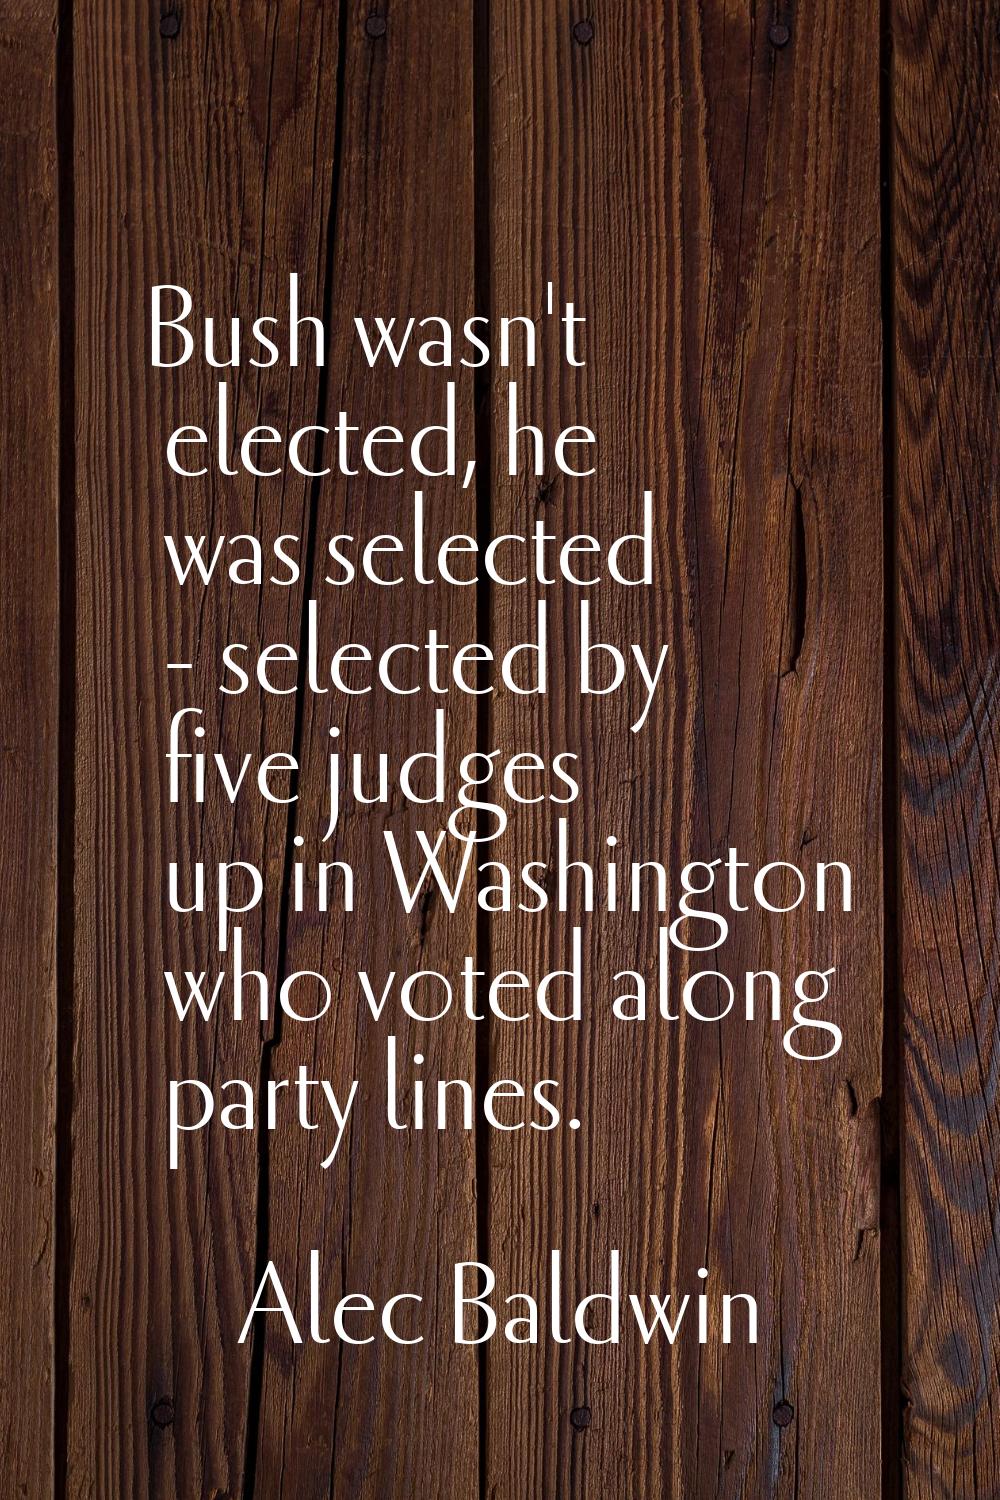 Bush wasn't elected, he was selected - selected by five judges up in Washington who voted along par